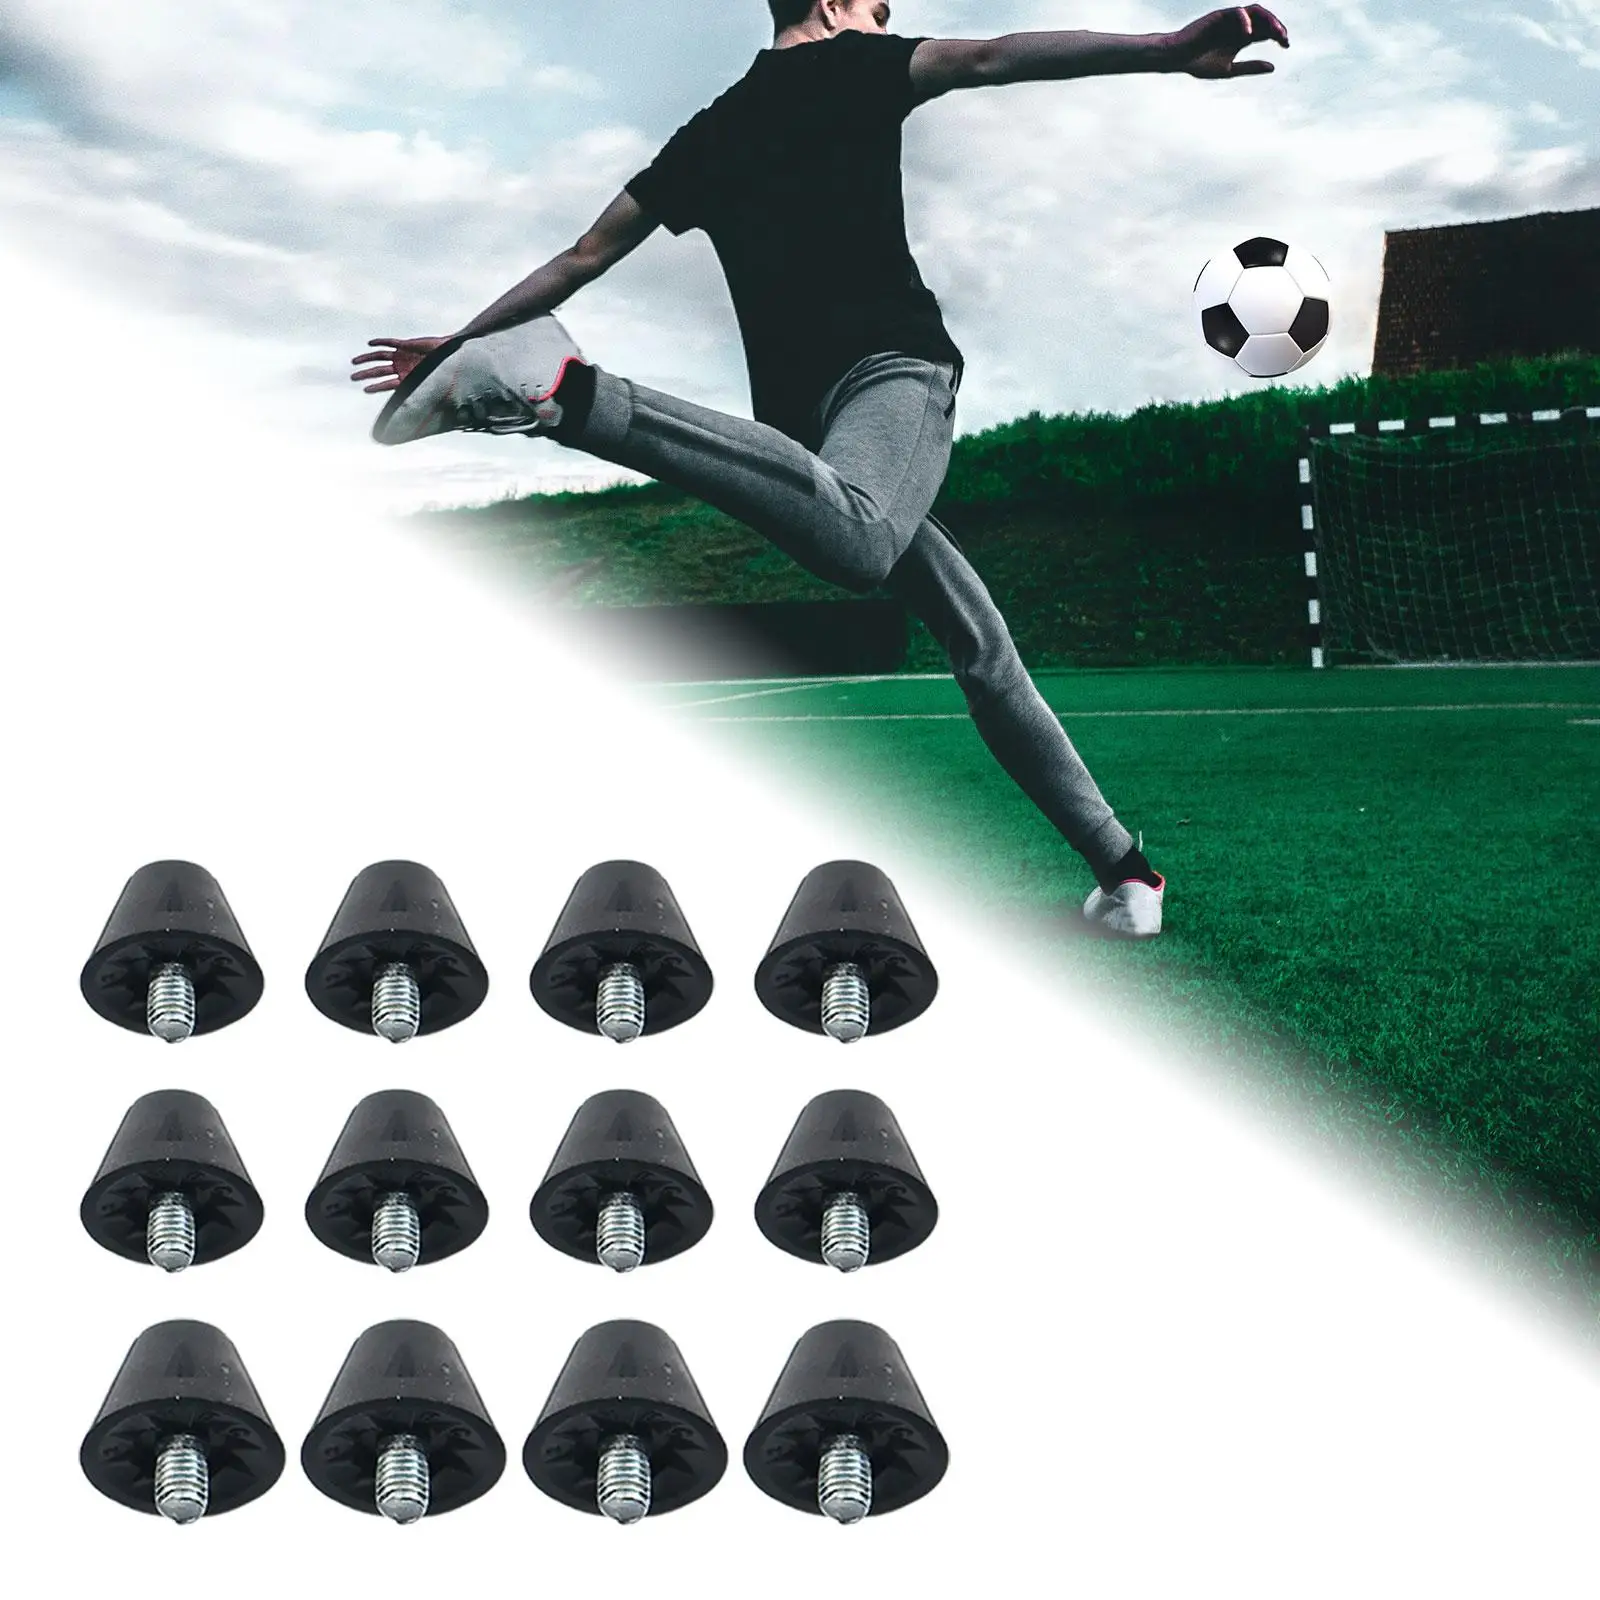 12x Football Shoe Spikes Turf Professional Soccer Boot Cleats for Training Athletic Sneakers Competition Indoor Outdoor Sports